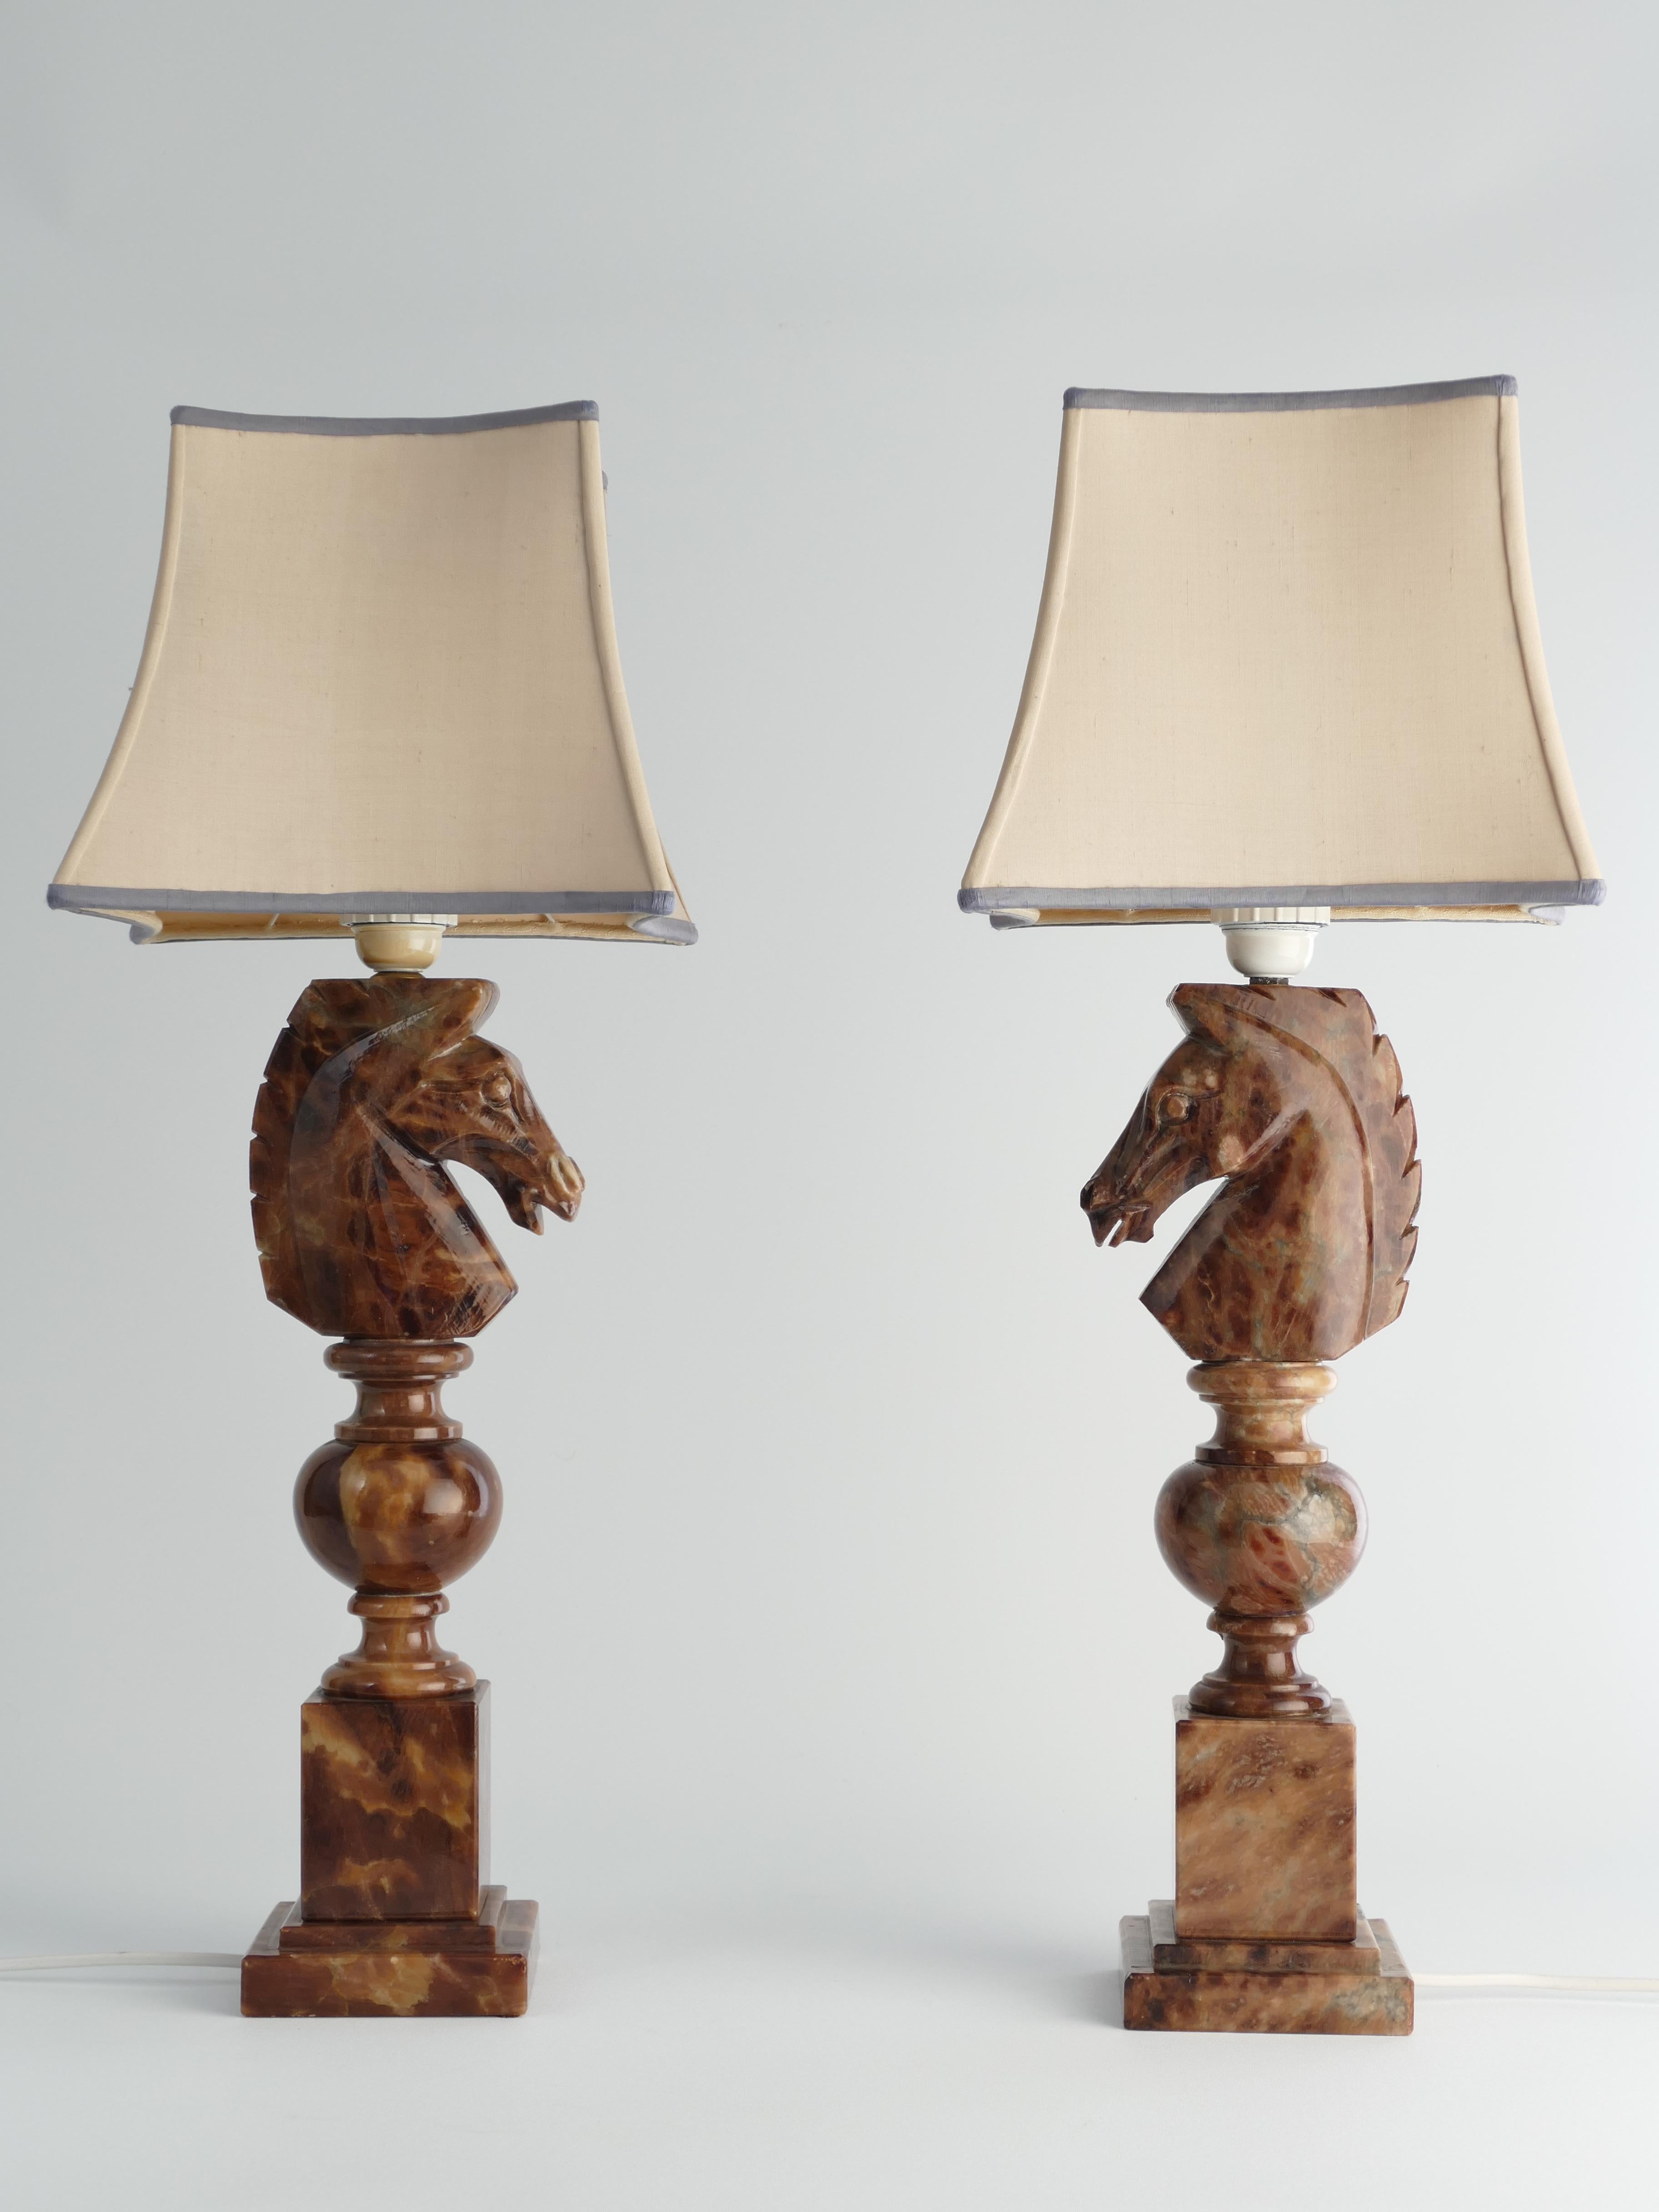 An astonishingly beautiful pair of Swedish-Italian hand-carved brown alabaster knight horse head table lamps, Nordiska Kompaniet, made in the 1970s.
The knight, an essential piece in the game of chess, is symbolized by a horse's head and neck,